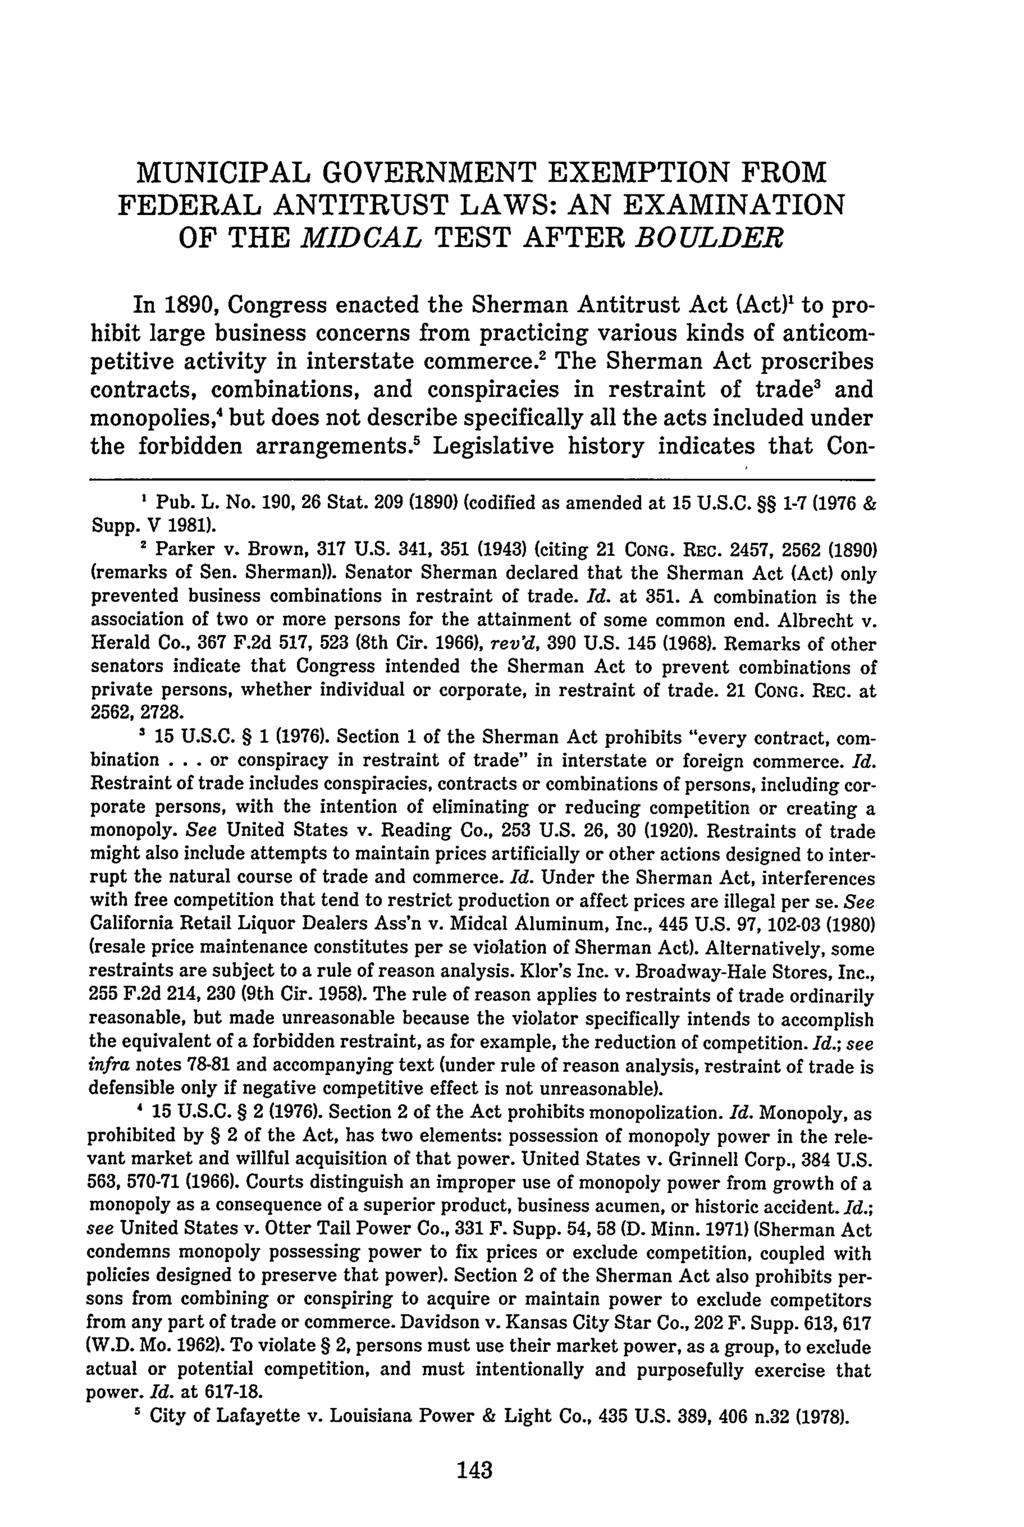 MUNICIPAL GOVERNMENT EXEMPTION FROM FEDERAL ANTITRUST LAWS: AN EXAMINATION OF THE MIDCAL TEST AFTER BOULDER In 1890, Congress enacted the Sherman Antitrust Act (Act)' to prohibit large business